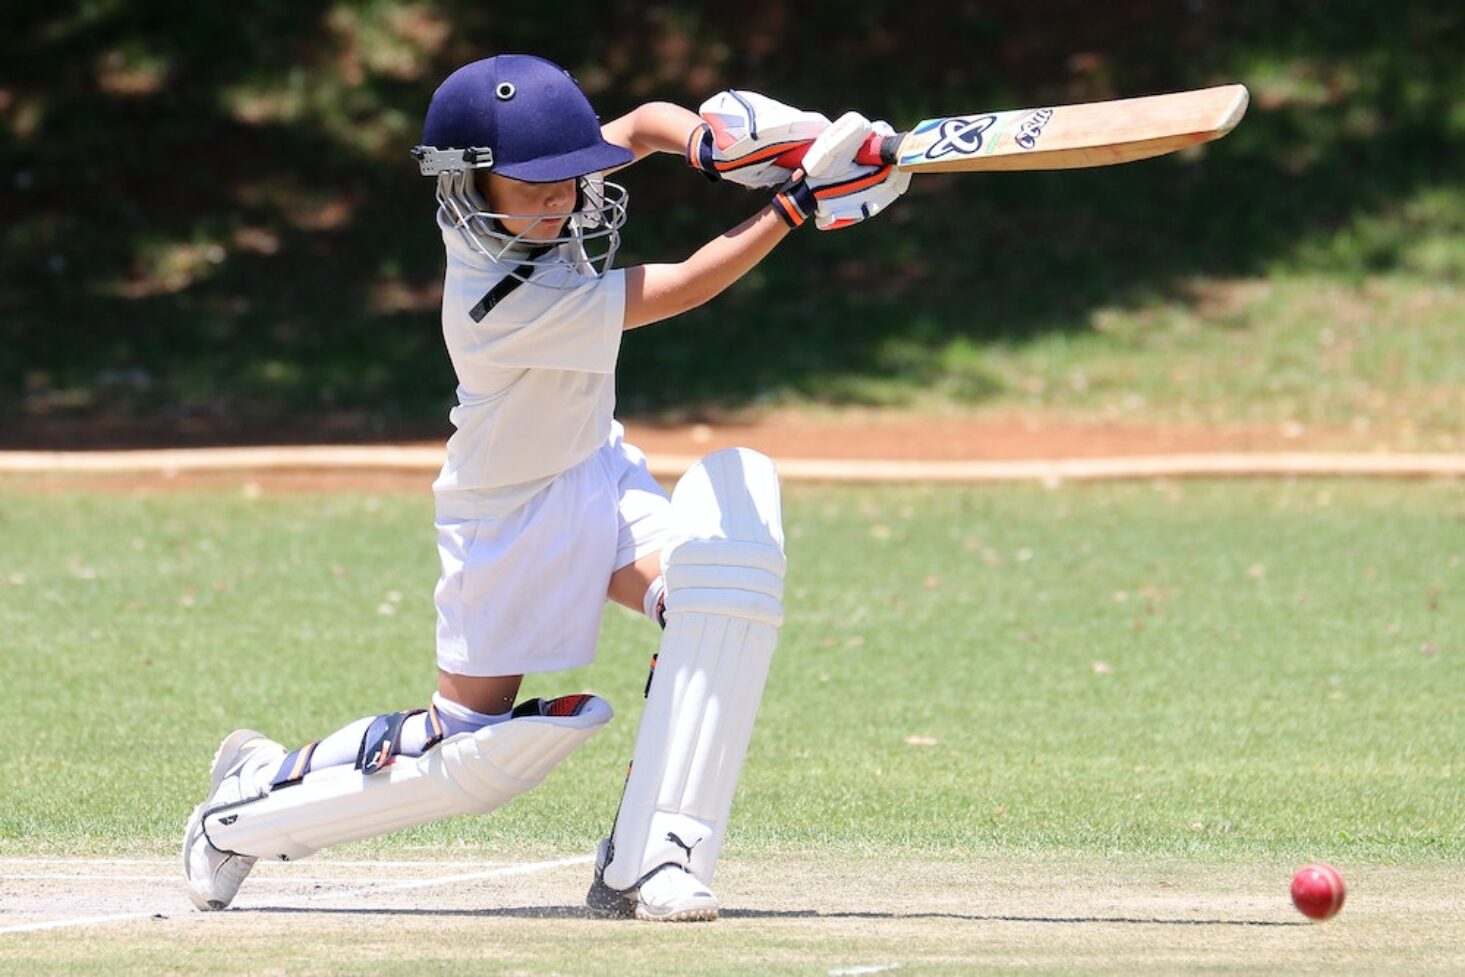 Cricket Skills and Drills for Young Players